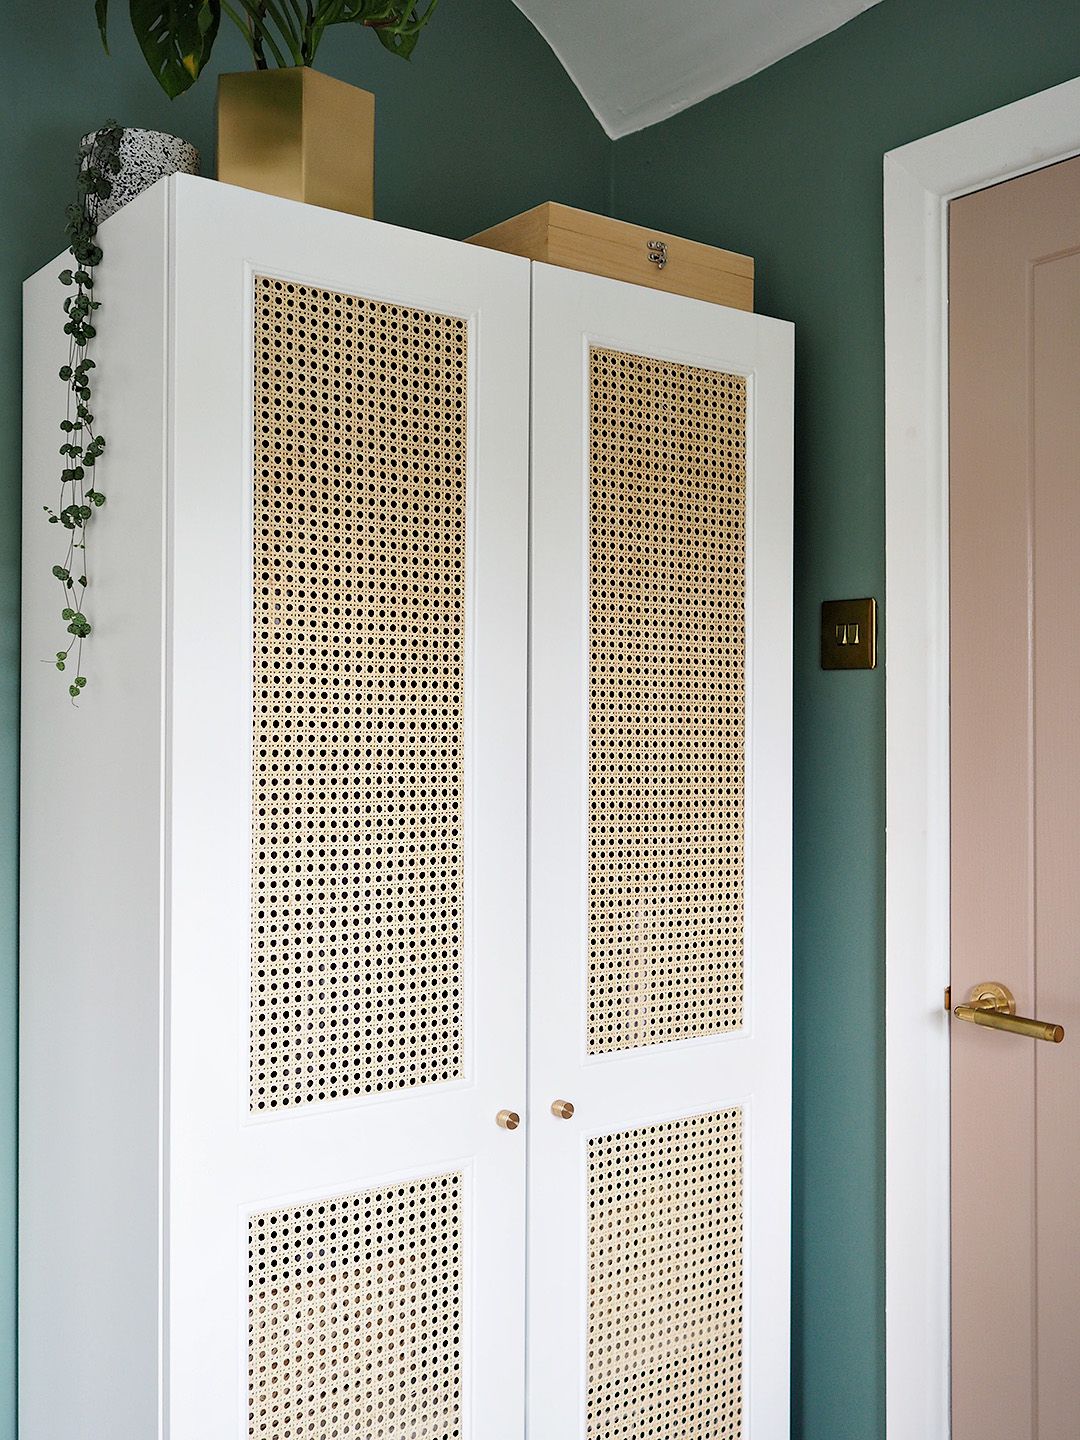 Rattan Cane Ikea Wardrobe Diy Hack For Under £170 | Lust Living Intended For White Rattan Wardrobes (Photo 14 of 15)